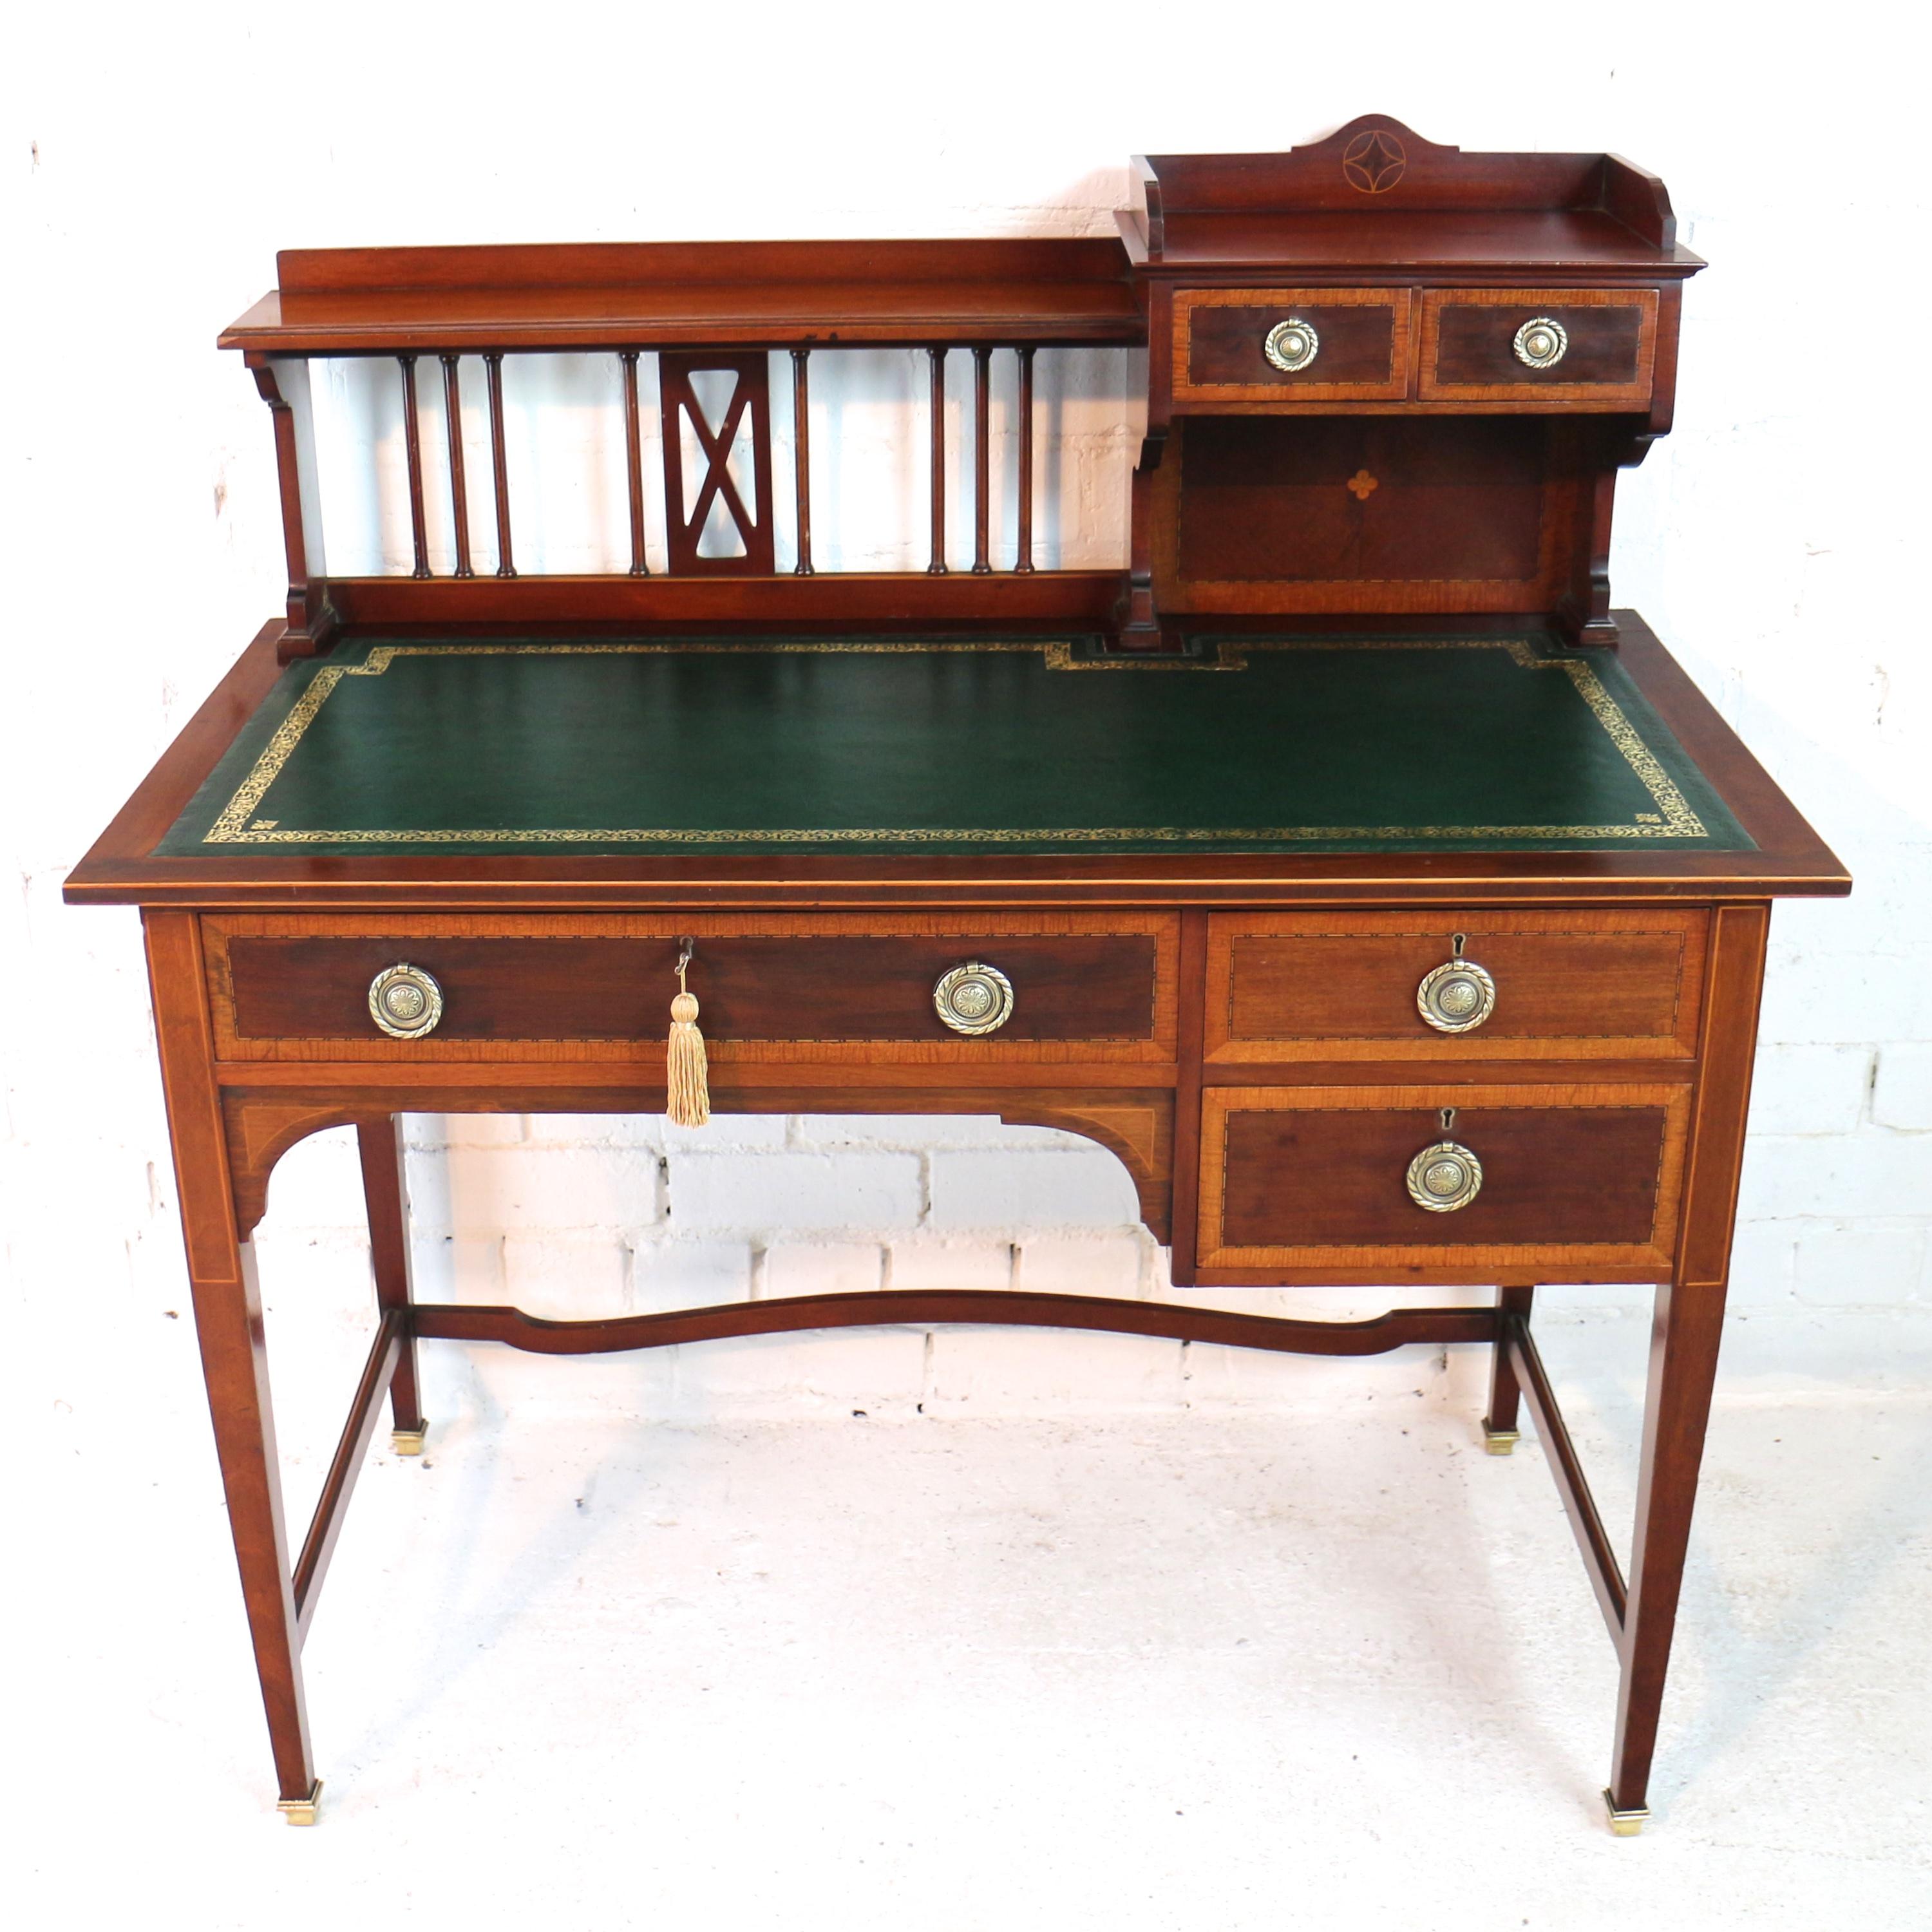 English Sheraton Revival Mahogany and Inlaid Desk, Attributed to Shapland & Petter